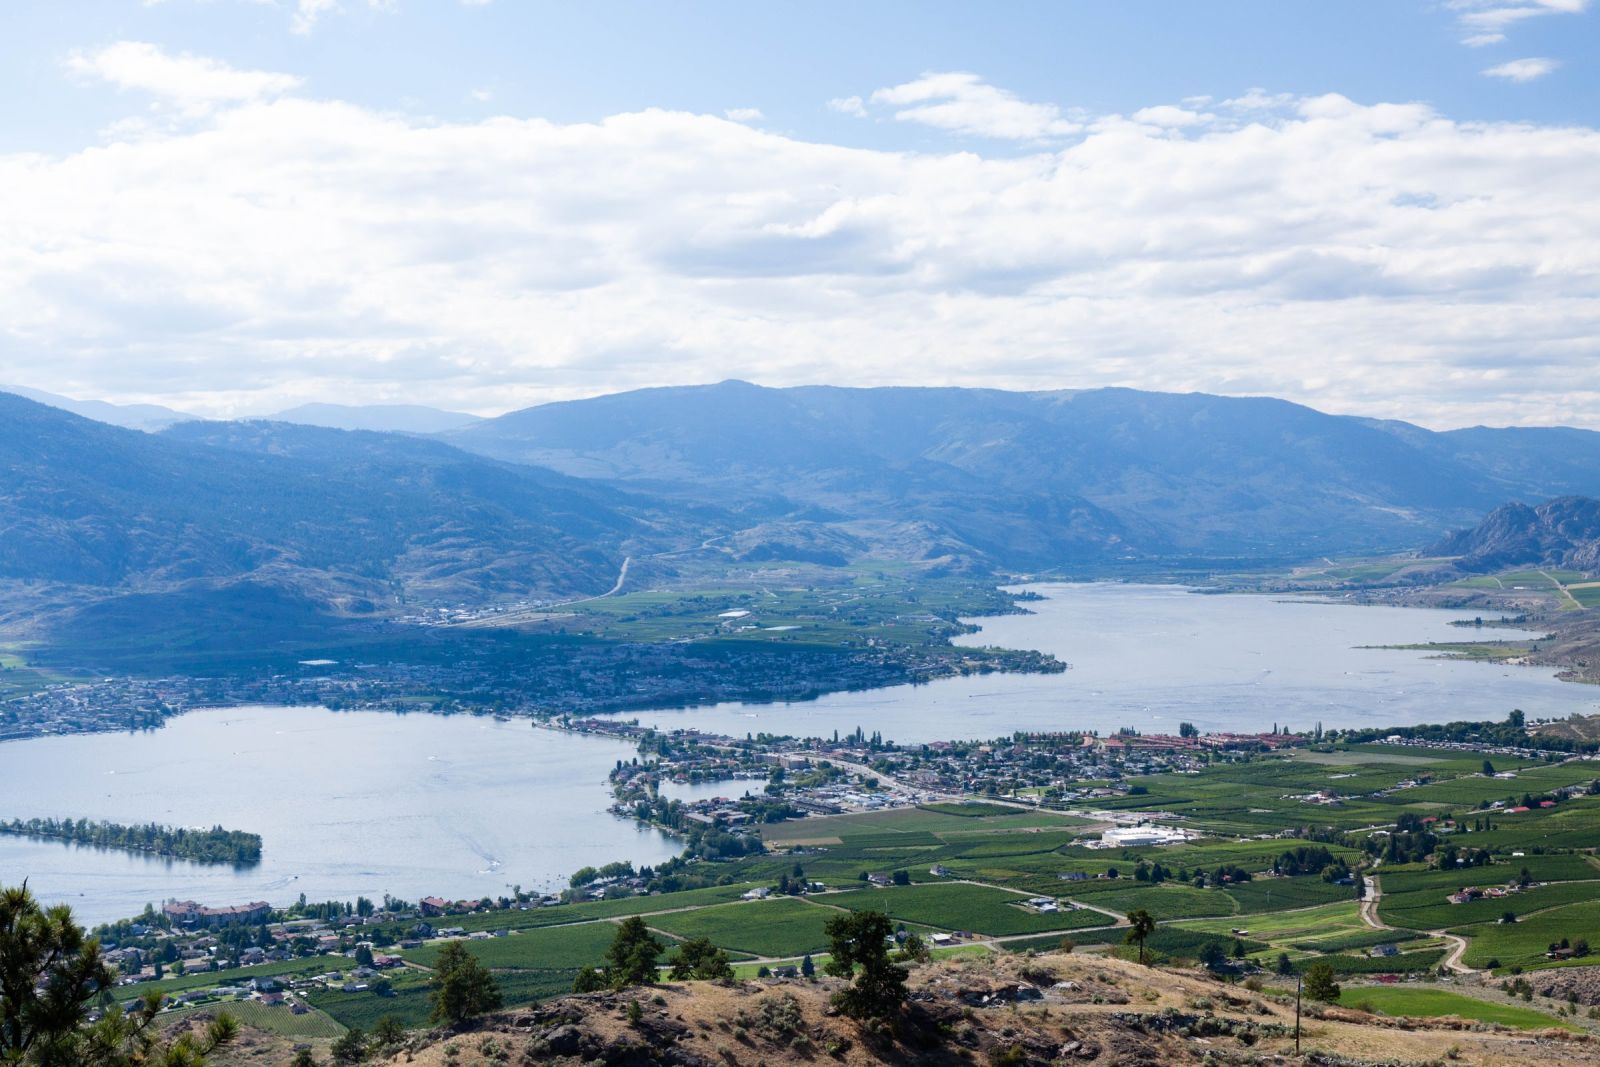 “Osoyoos” means “narrowing of the waters” in the local language